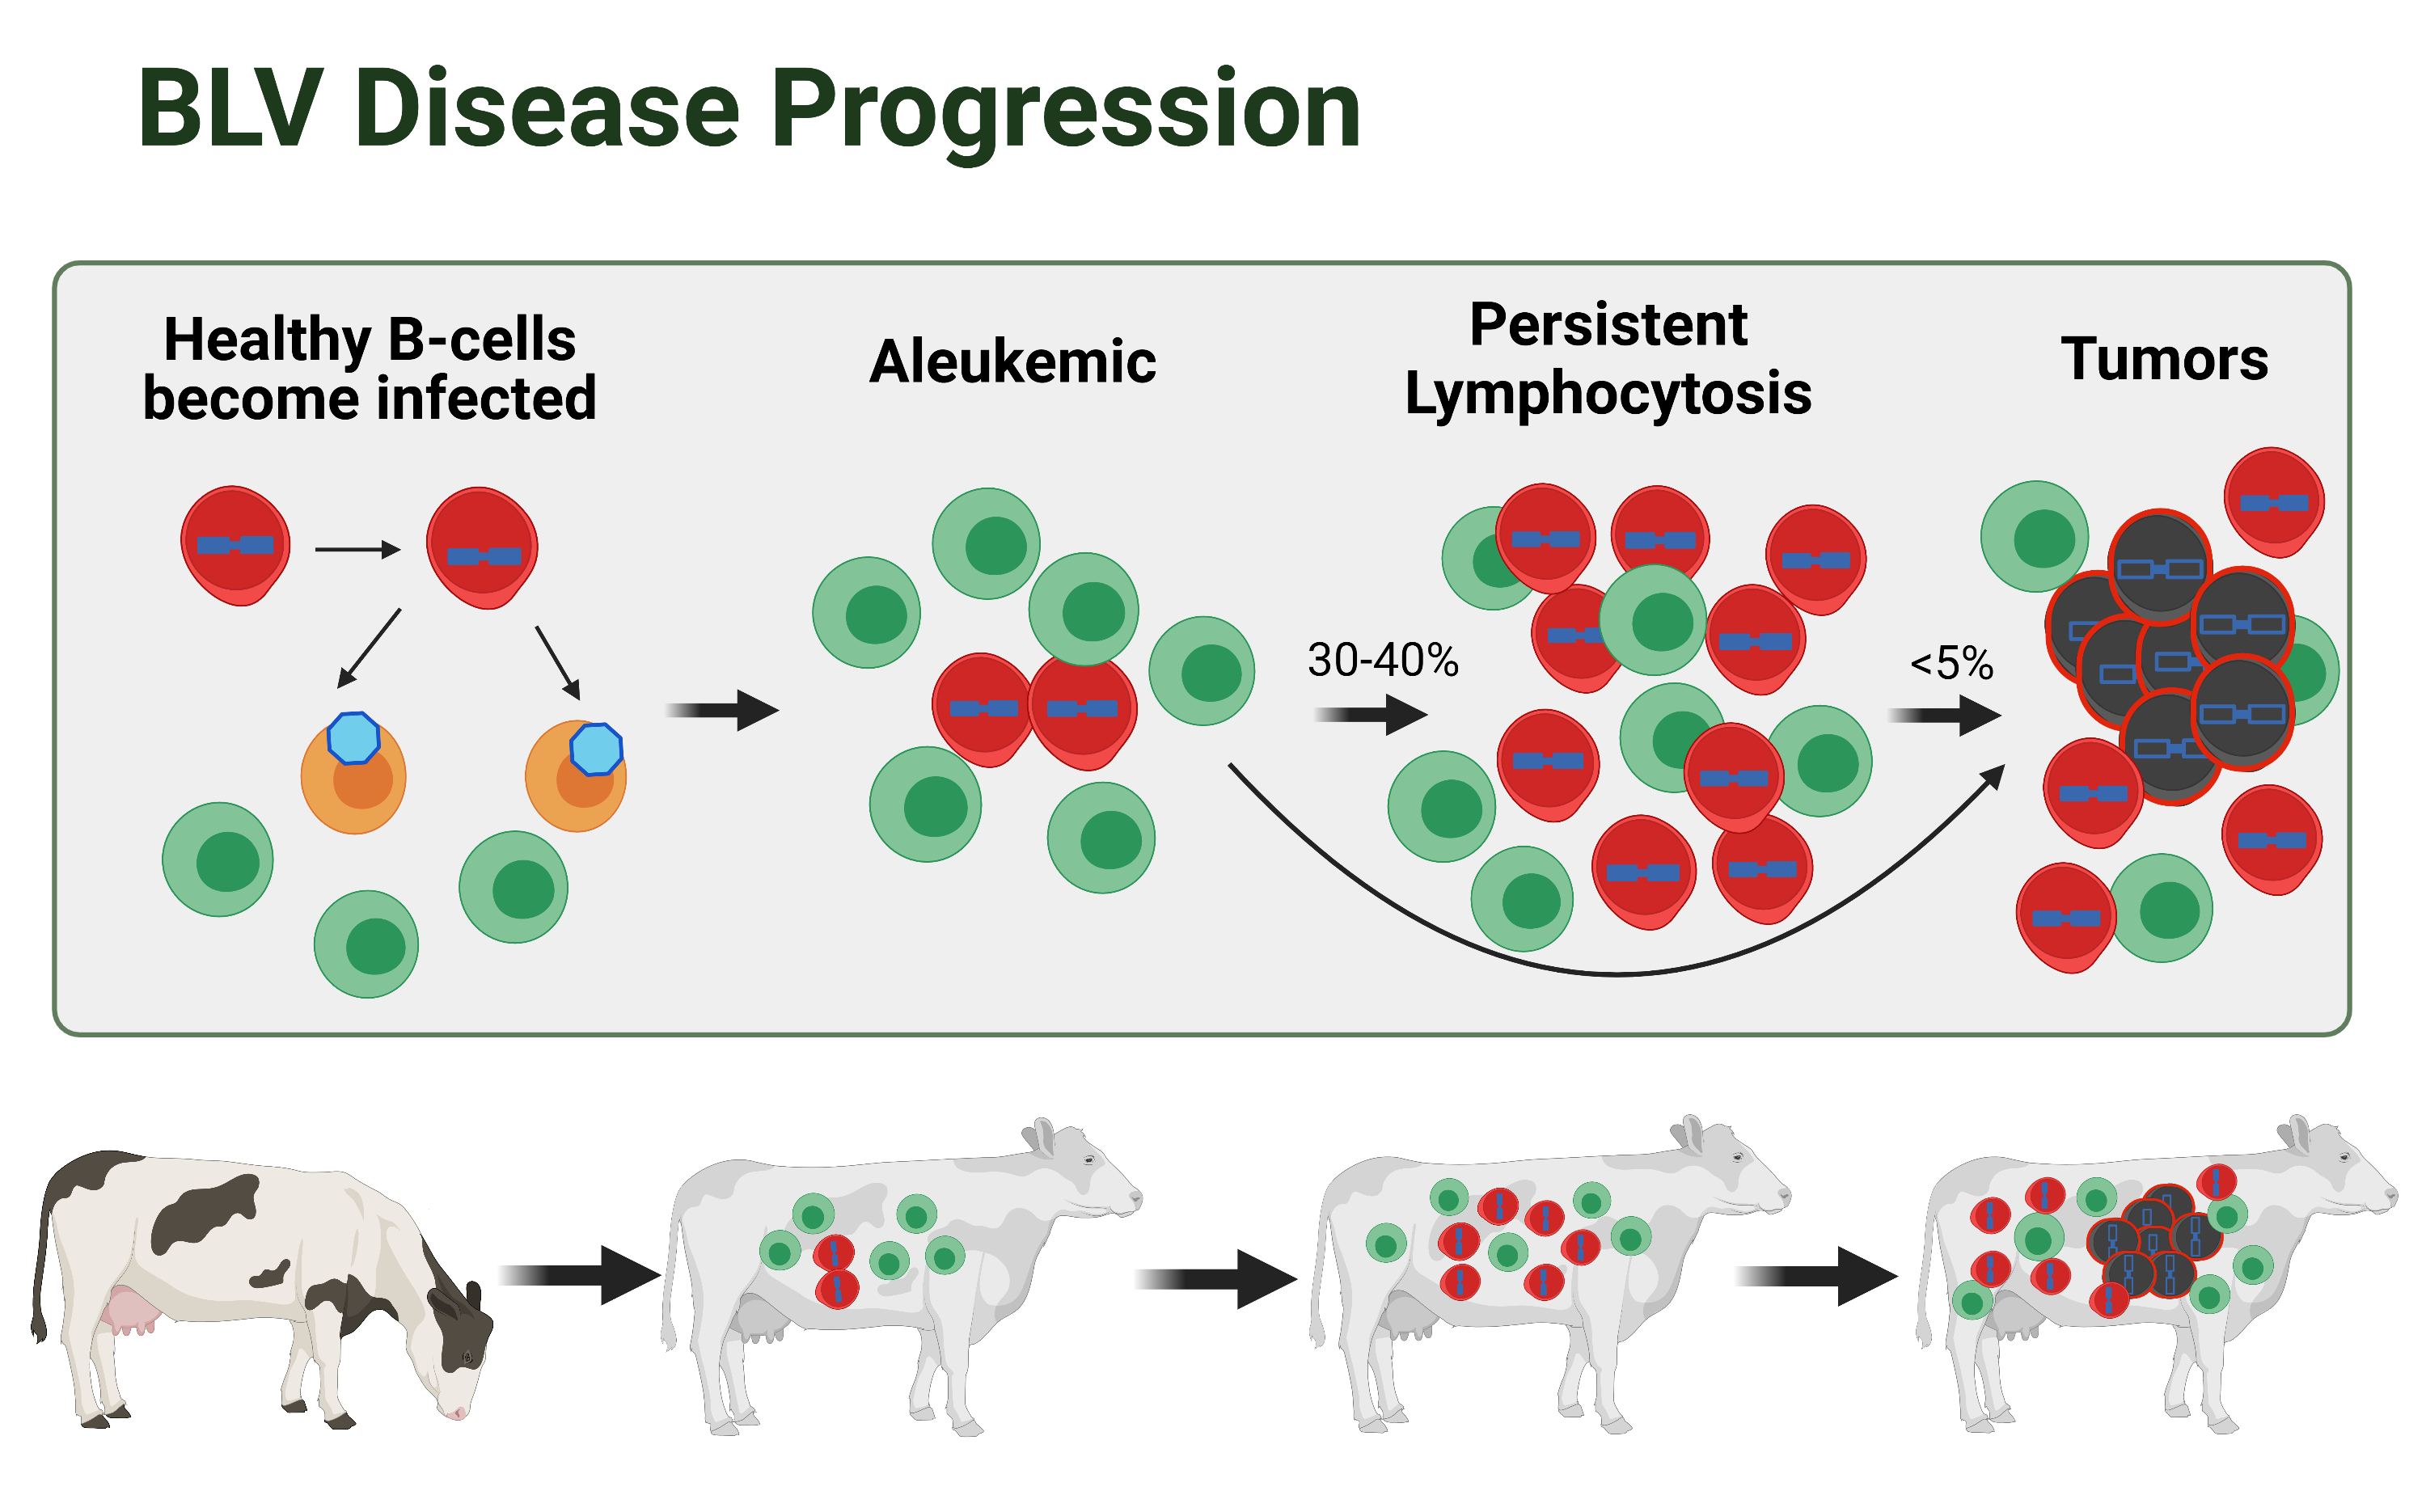 Data of the stages of BLV Disease Progression